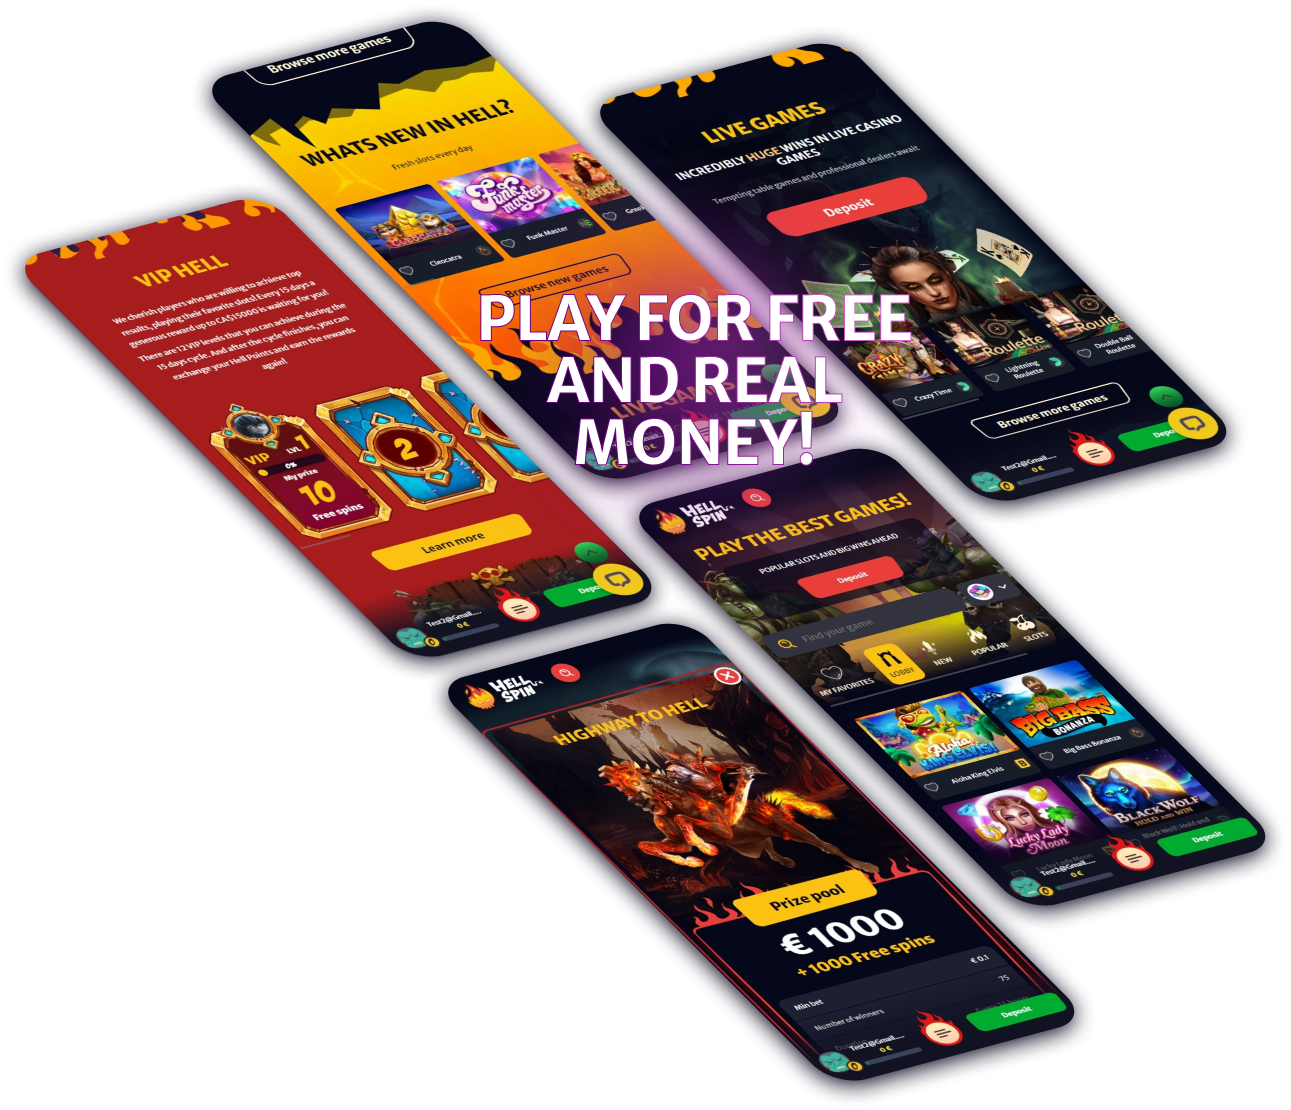 Play for free and real money! In HellSpin Casino